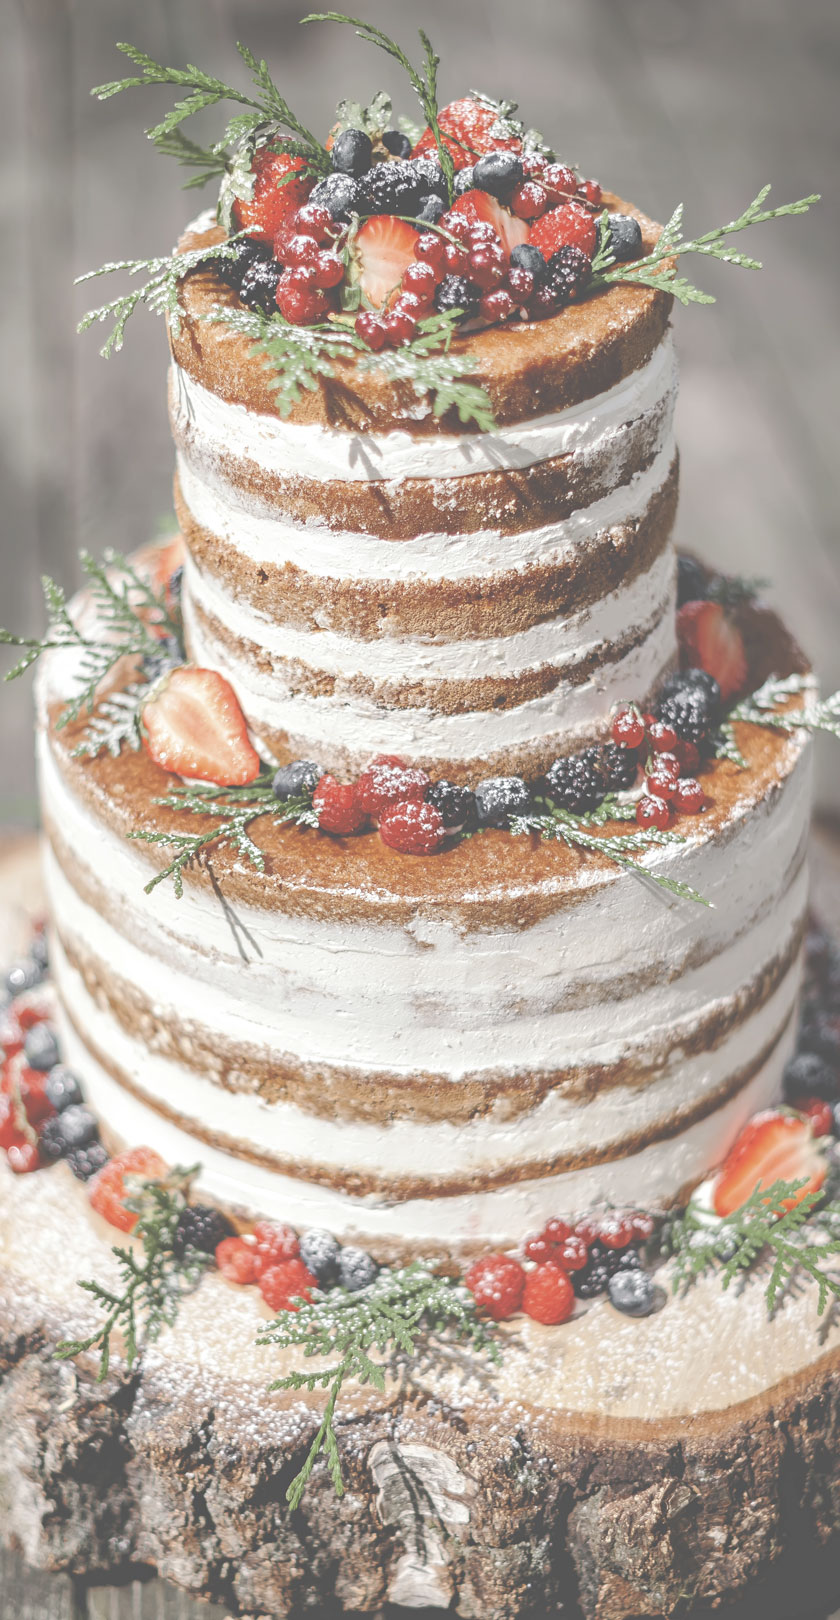 3-tier rustic style wedding cake topped with mixed berries, evergreen leaves and sprinkled icing sugar. The cake is sitting on a slice of wood